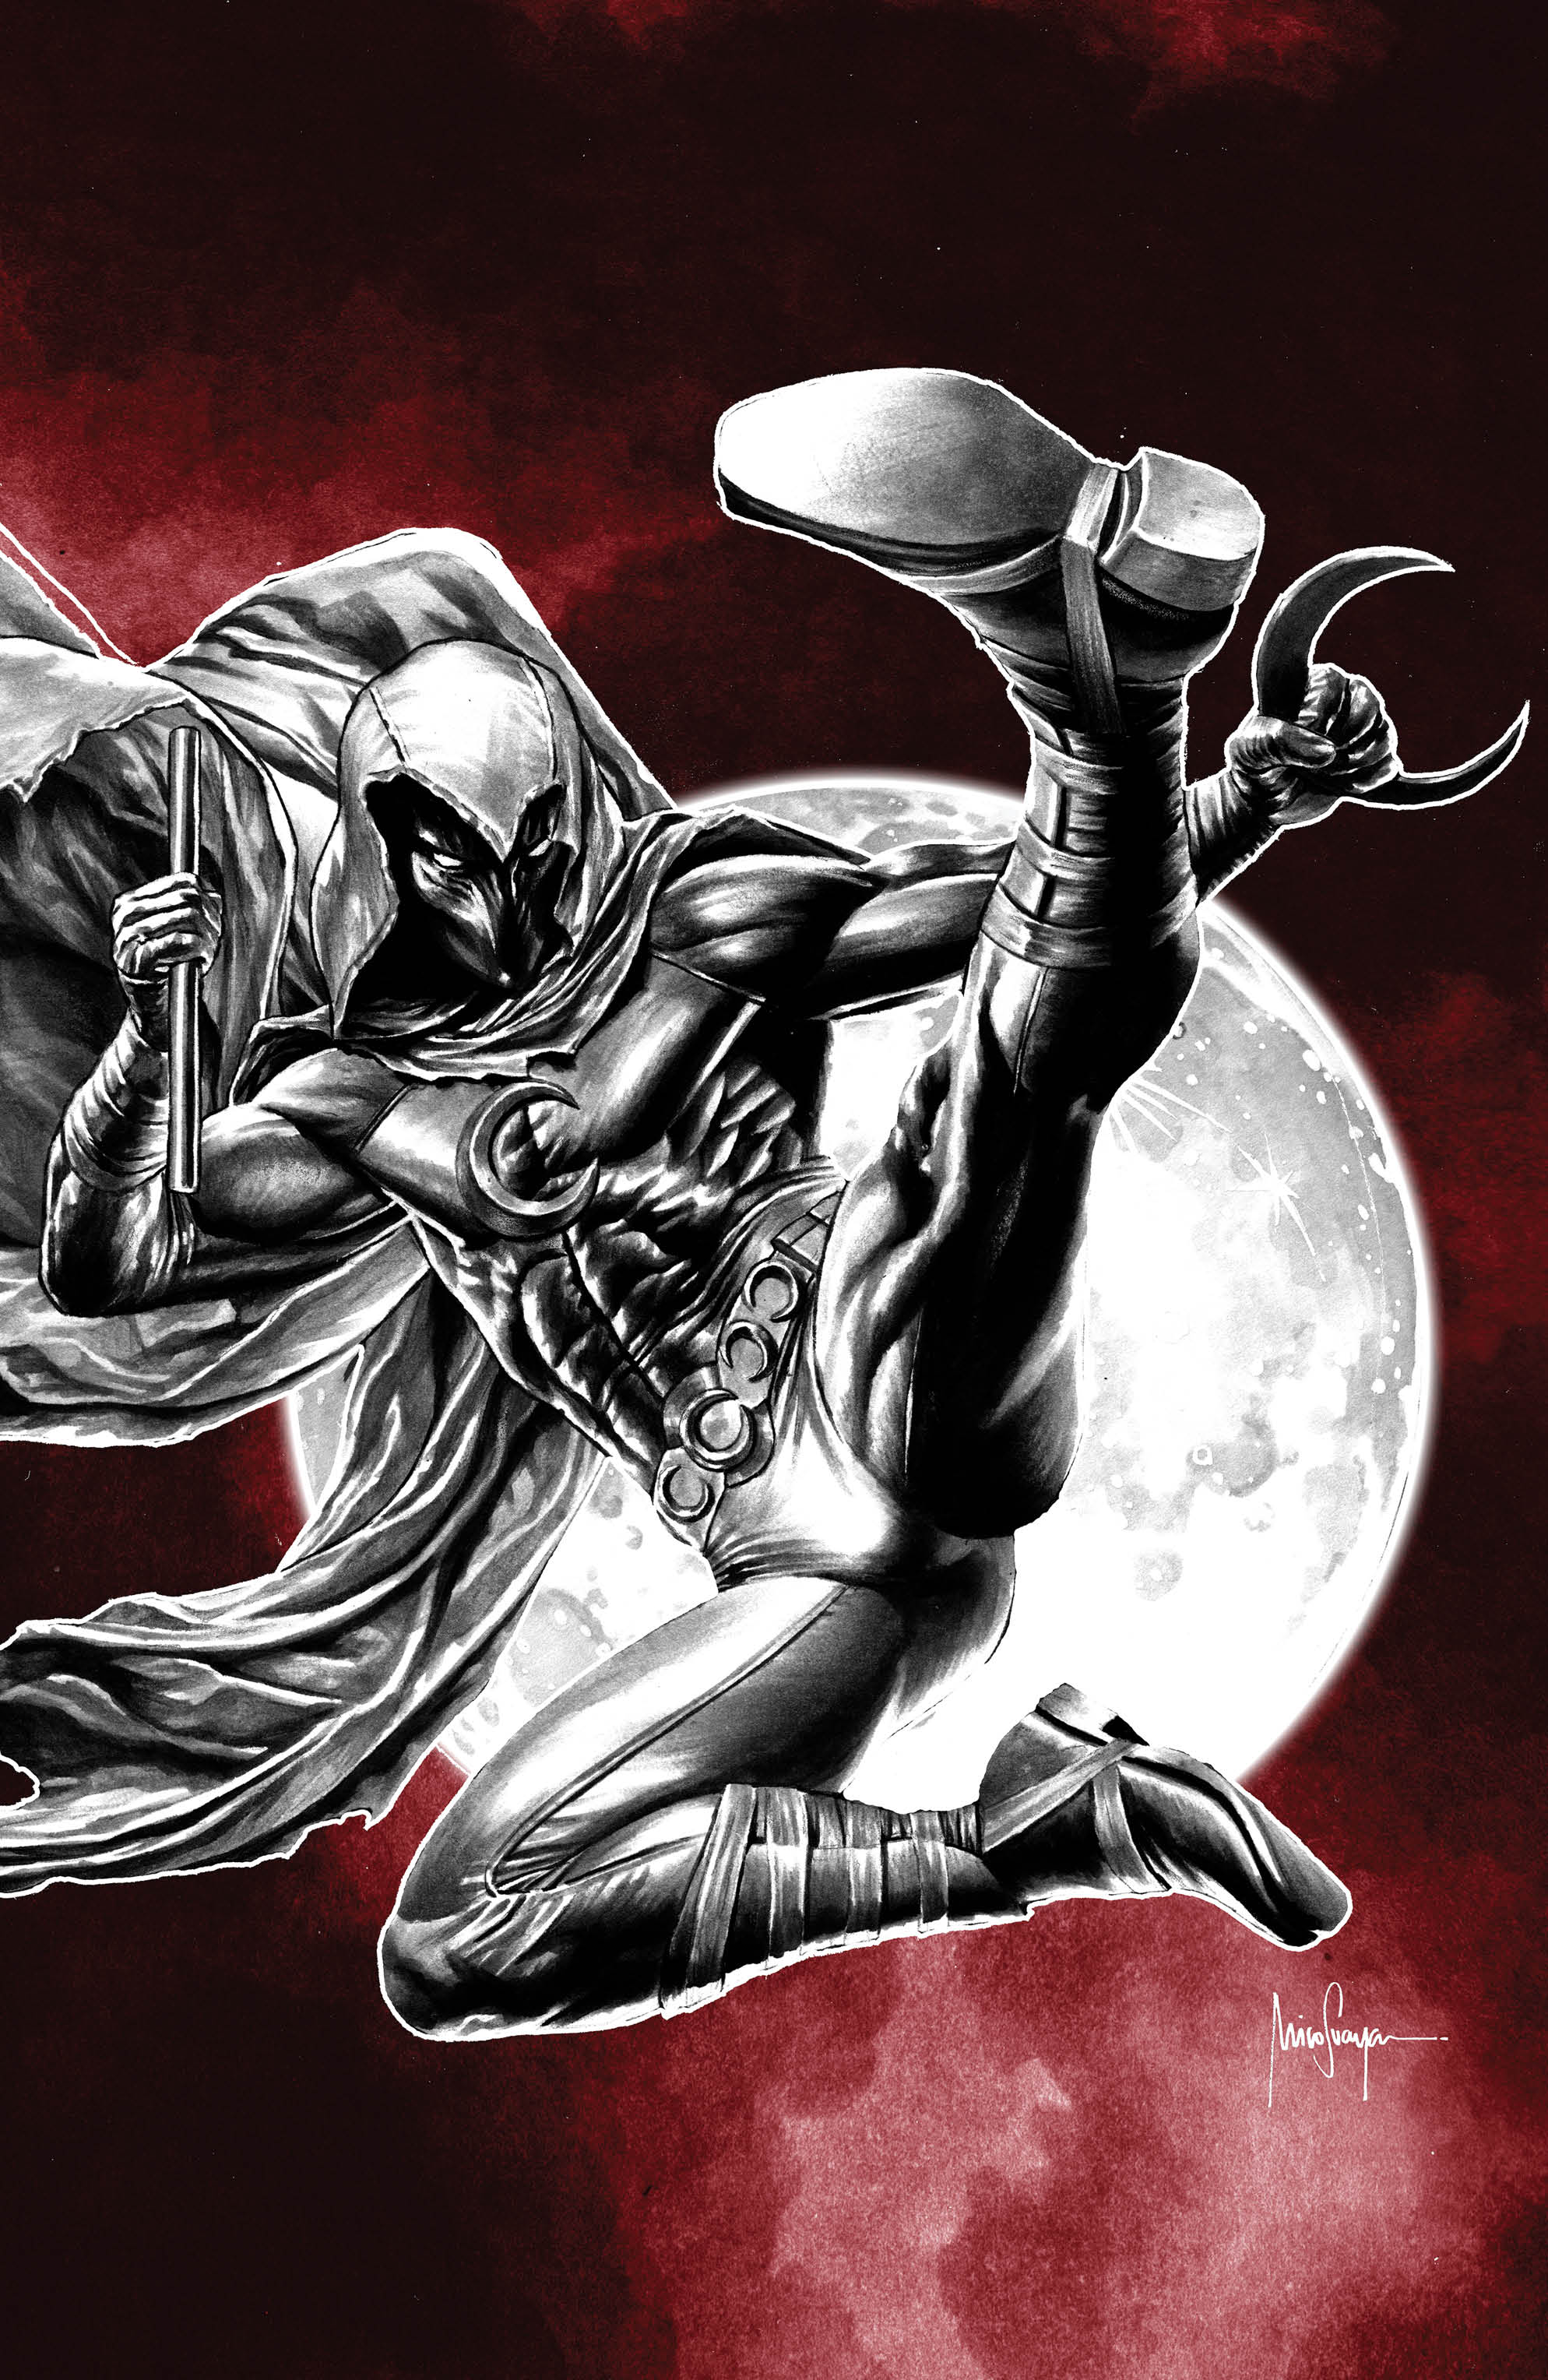 MOON KNIGHT: BLACK, WHITE & BLOOD 1 MICO SUAYAN EXCLUSIVE VARIANT OPTIONS